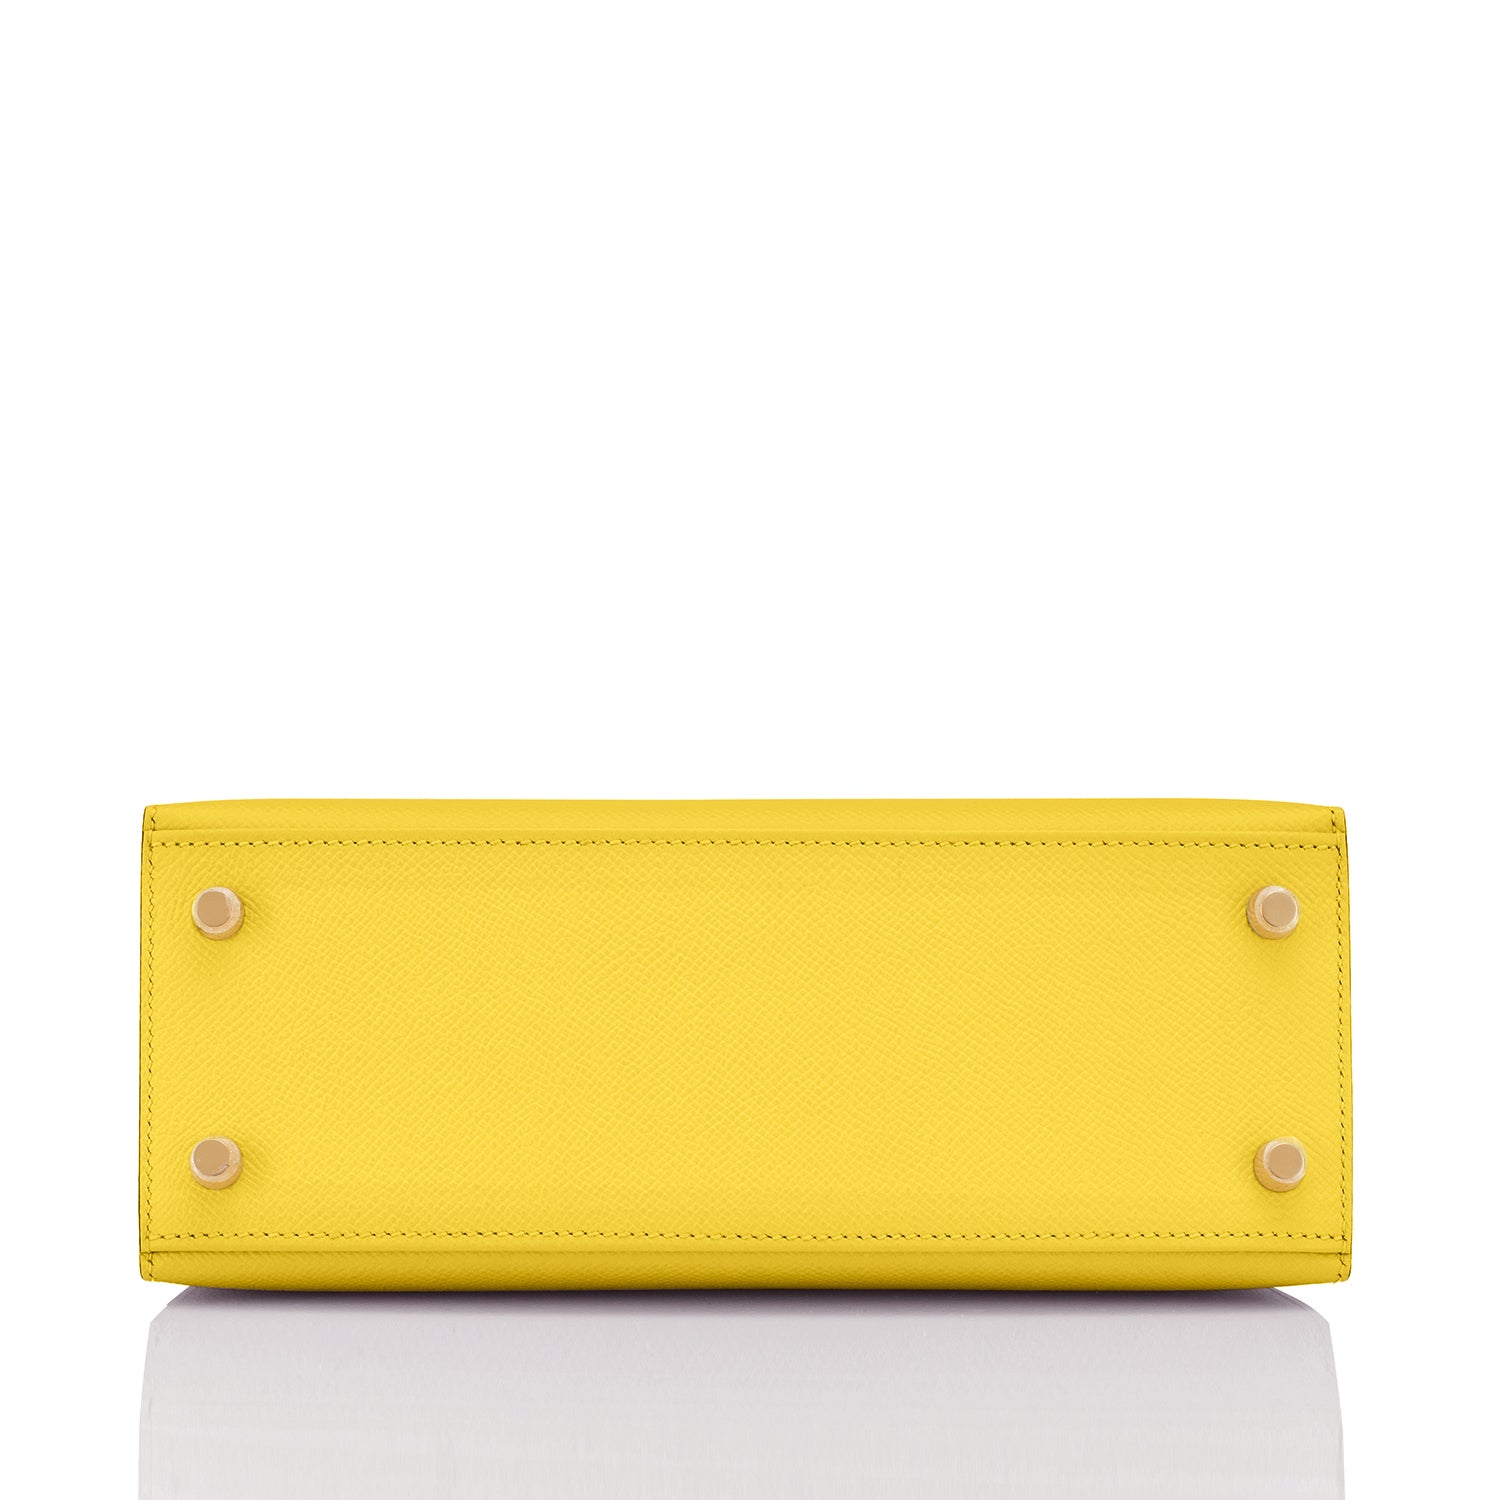 Look no further than this authentic Hermès 25 cm Lime Yellow Epsom Sellier  Kelly – Only Authentics